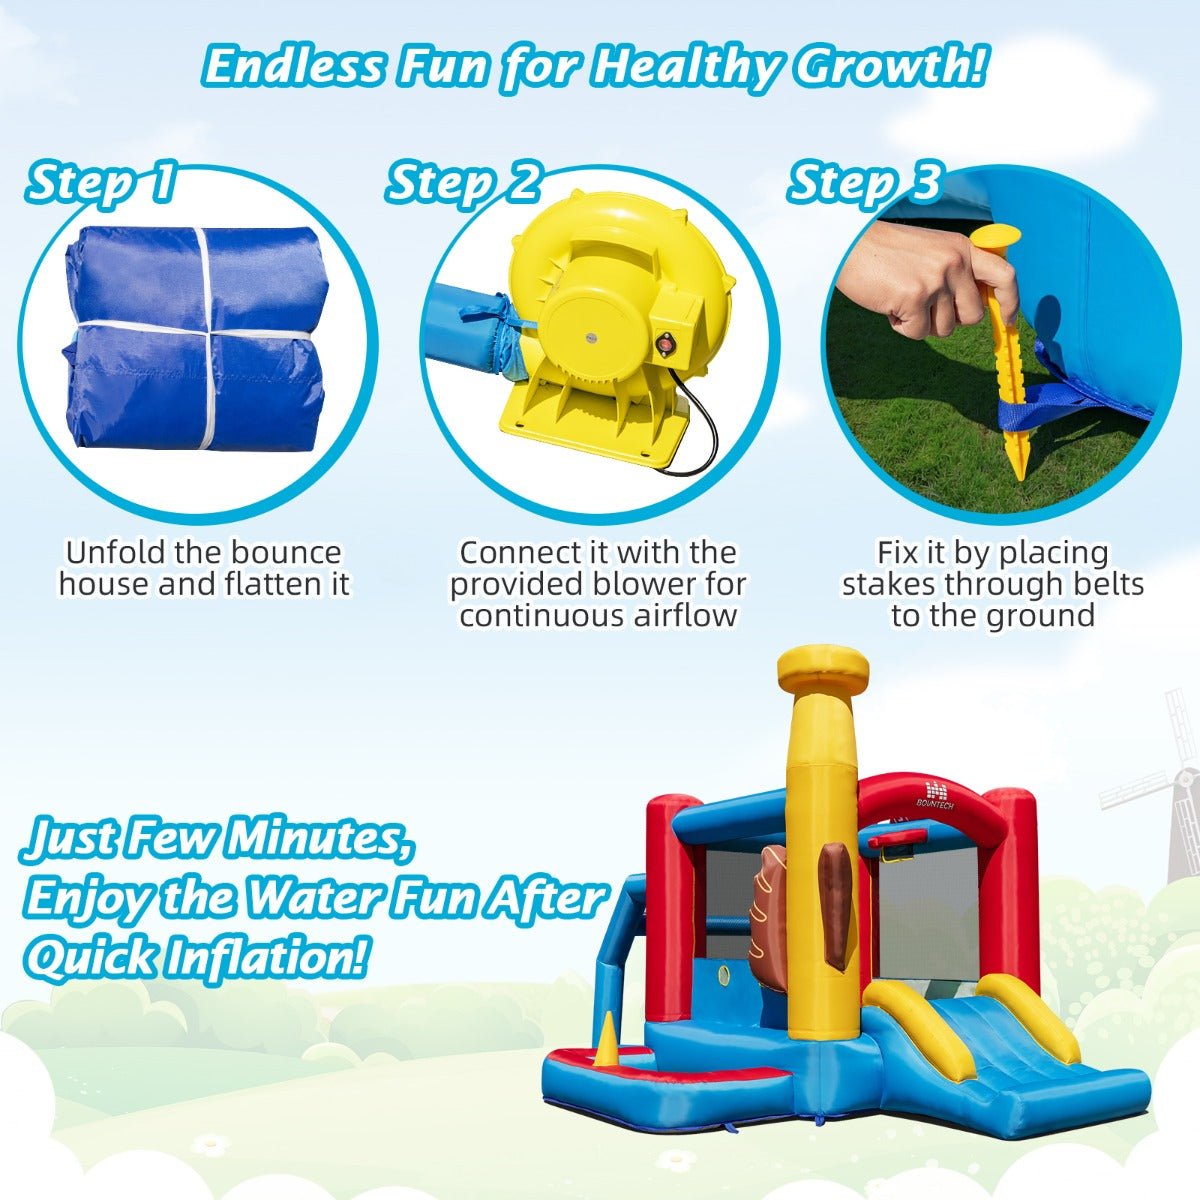 Kids Baseball Jumping Castle - Active Play with Ocean Ball Delight